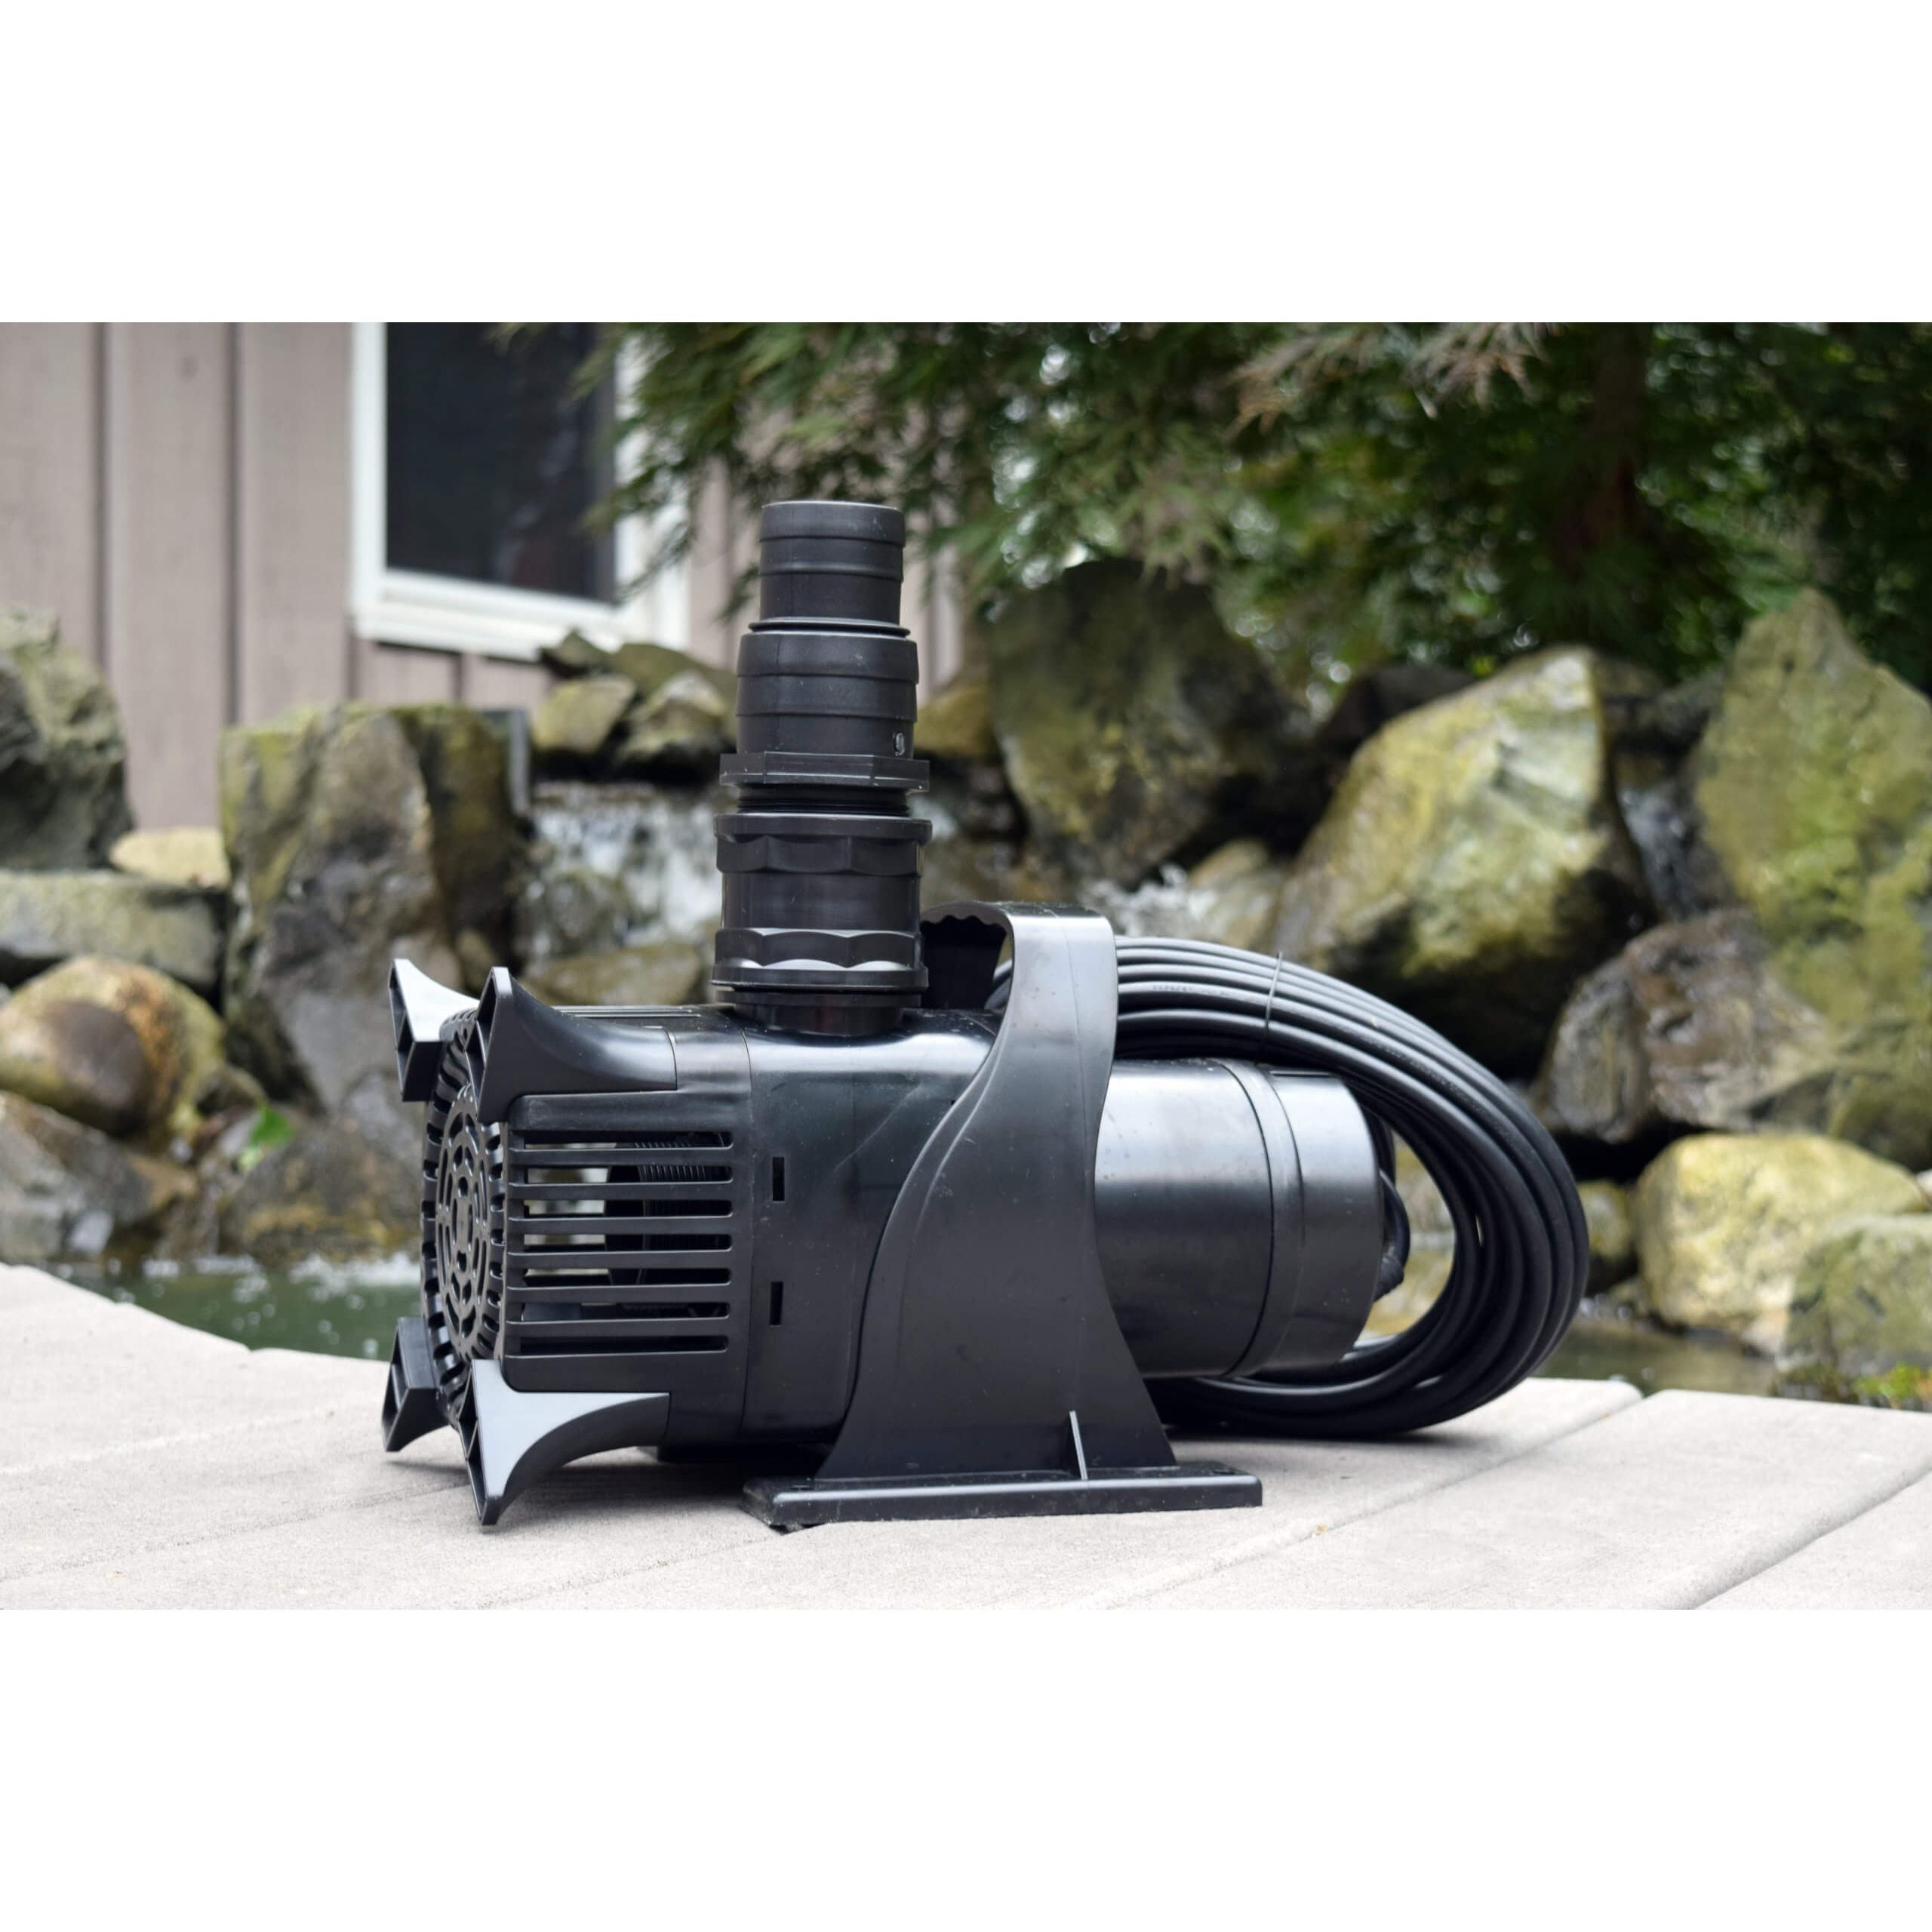 Easy Pro EPA Series Asynchronous Submersible Mag Drive Pumps - American Pond Supplies Easy Pro 6760 gph Mag Drive Pumps Mag Drive Pumps